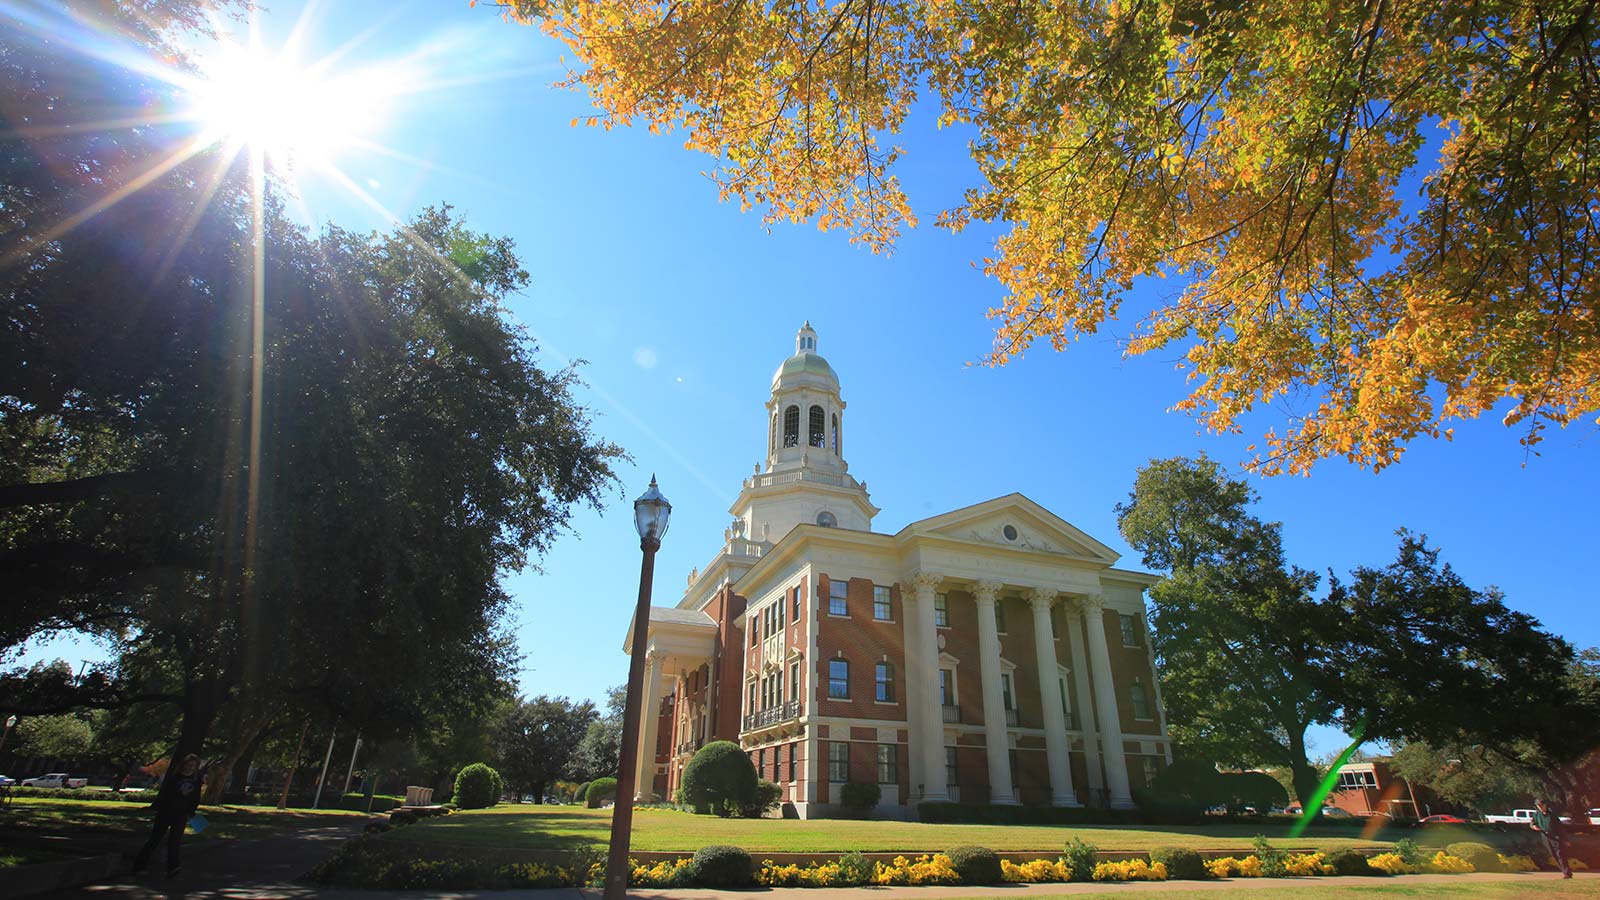 Fall brings wonderful color to campus - here adorning Pat Neff Hall with Baylor gold.